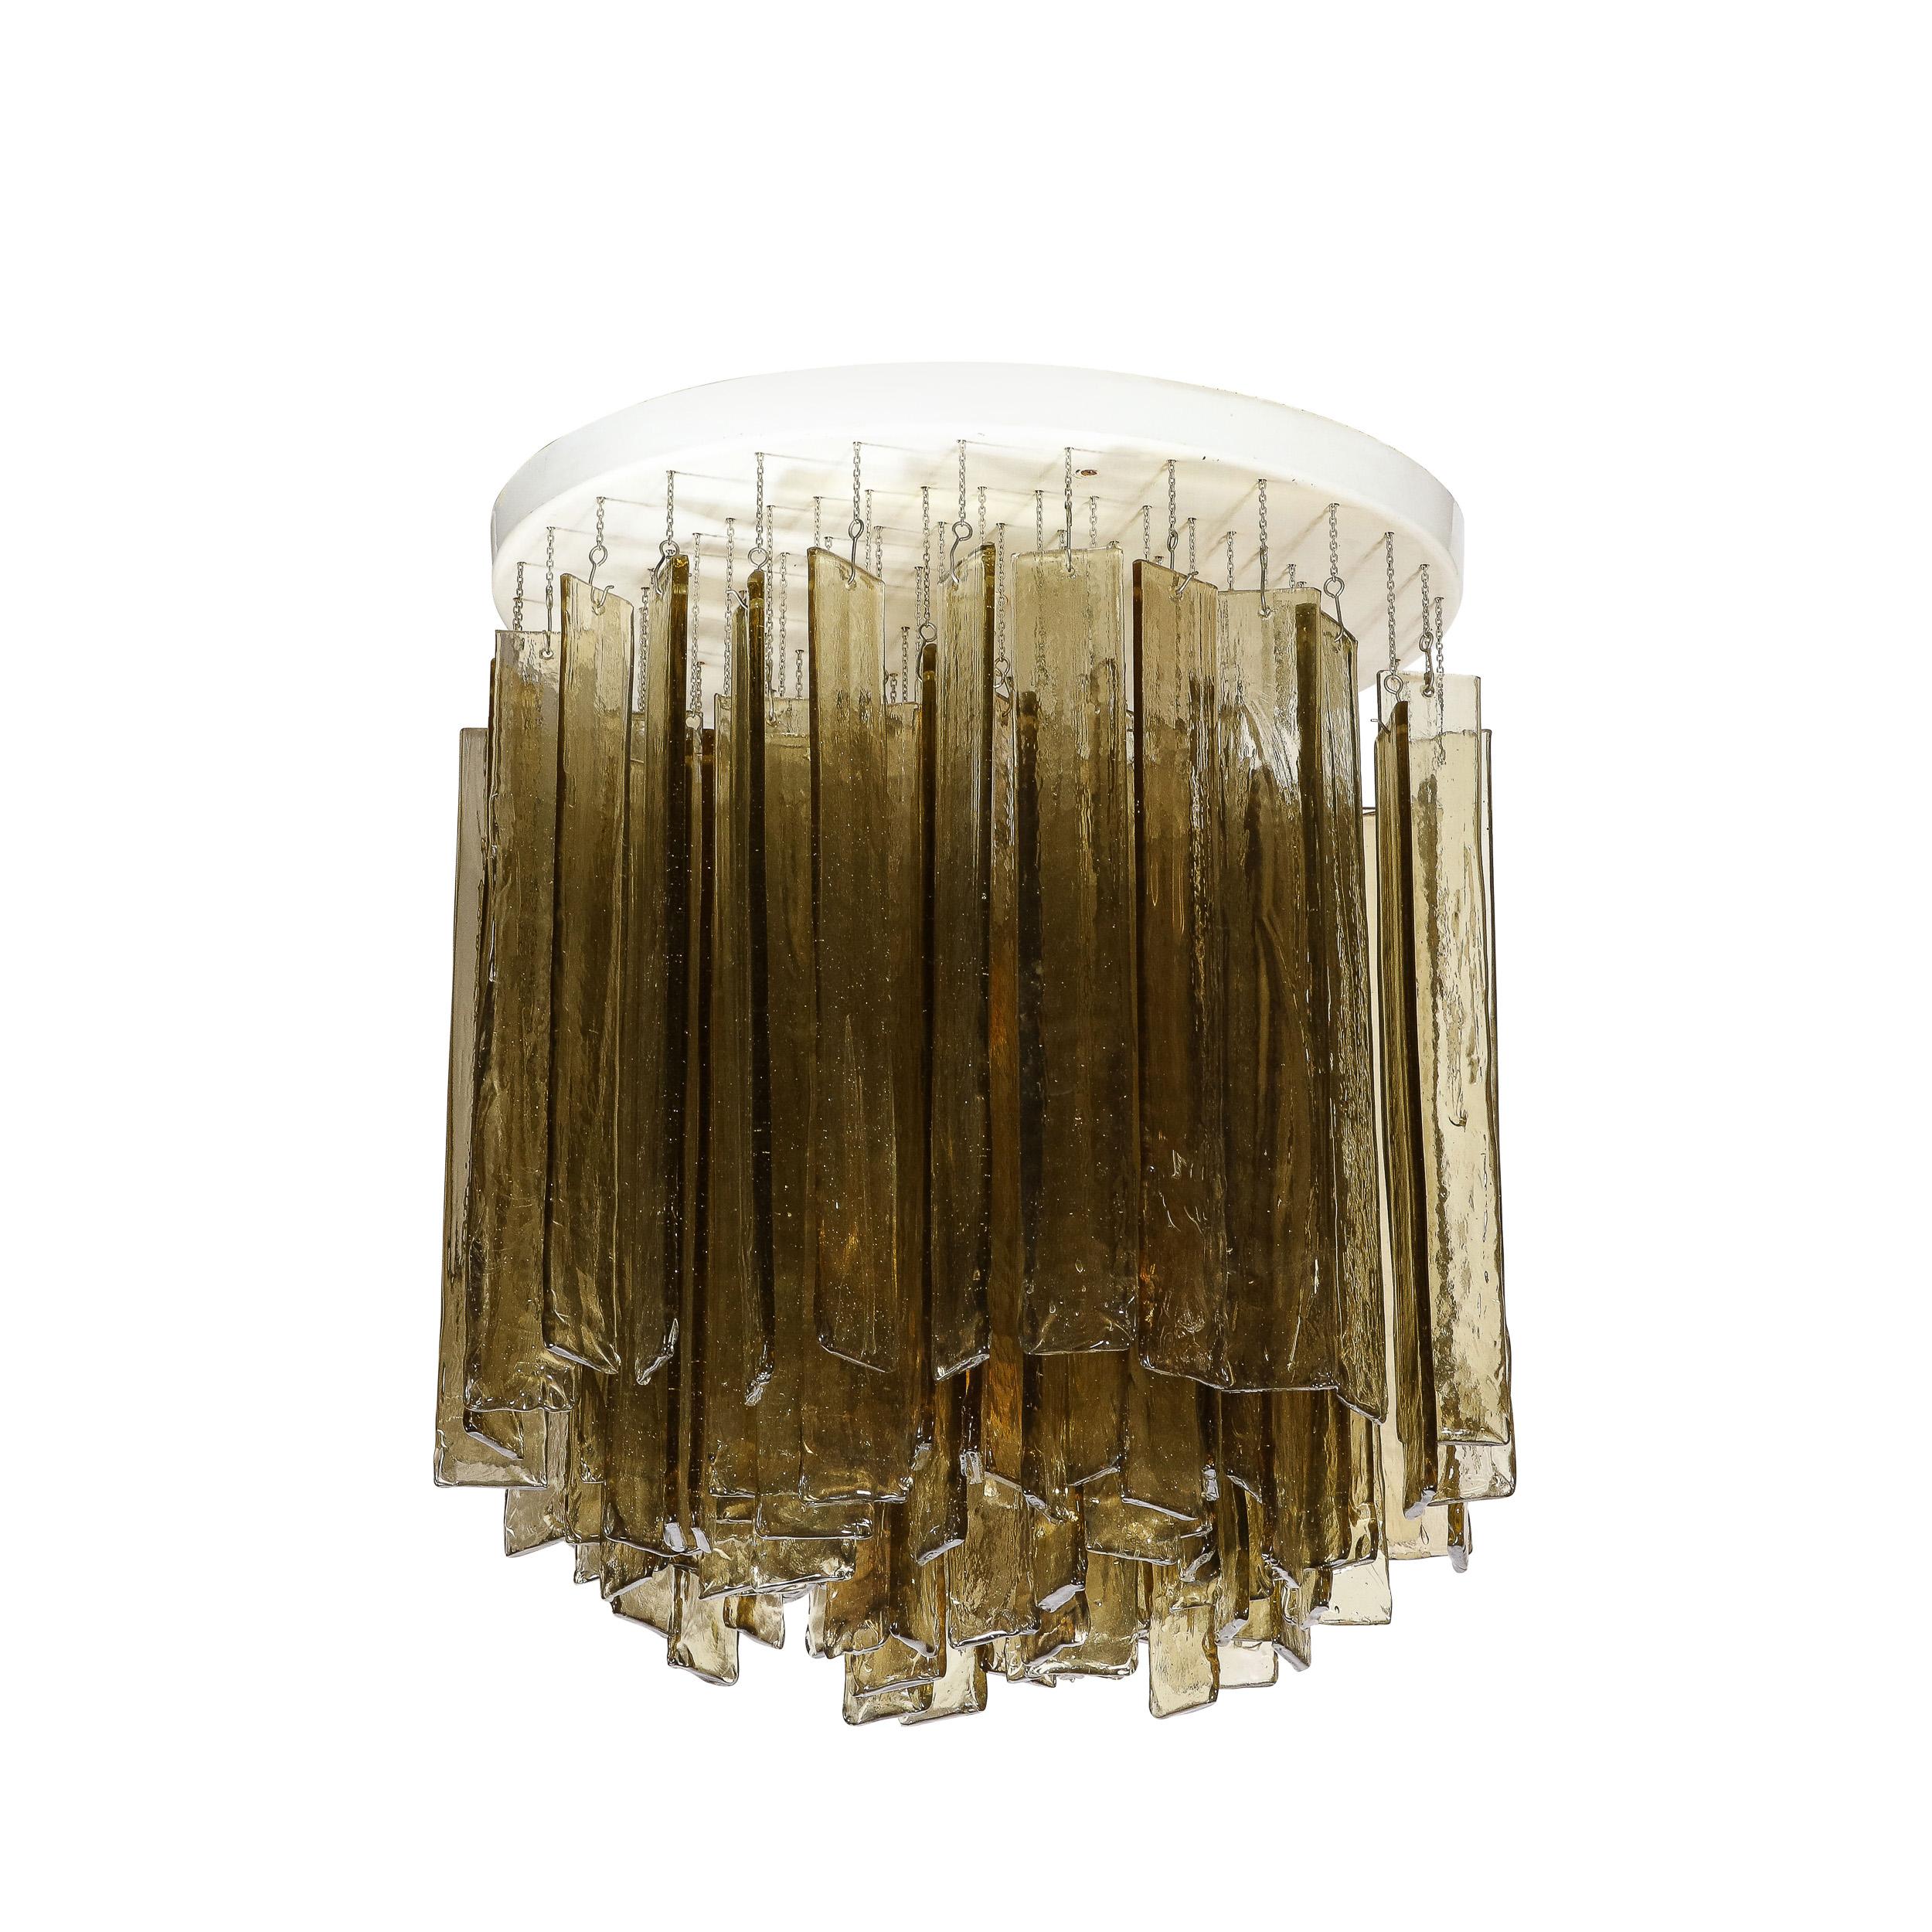 This elegant and refined Mid-Century Modern chandelier was realized by the legendary atelier, Mazzega, in Murano, Italy- the island off the coast of Venice renowned for its superlative glass production- circa 1970. It features an abundance of hand